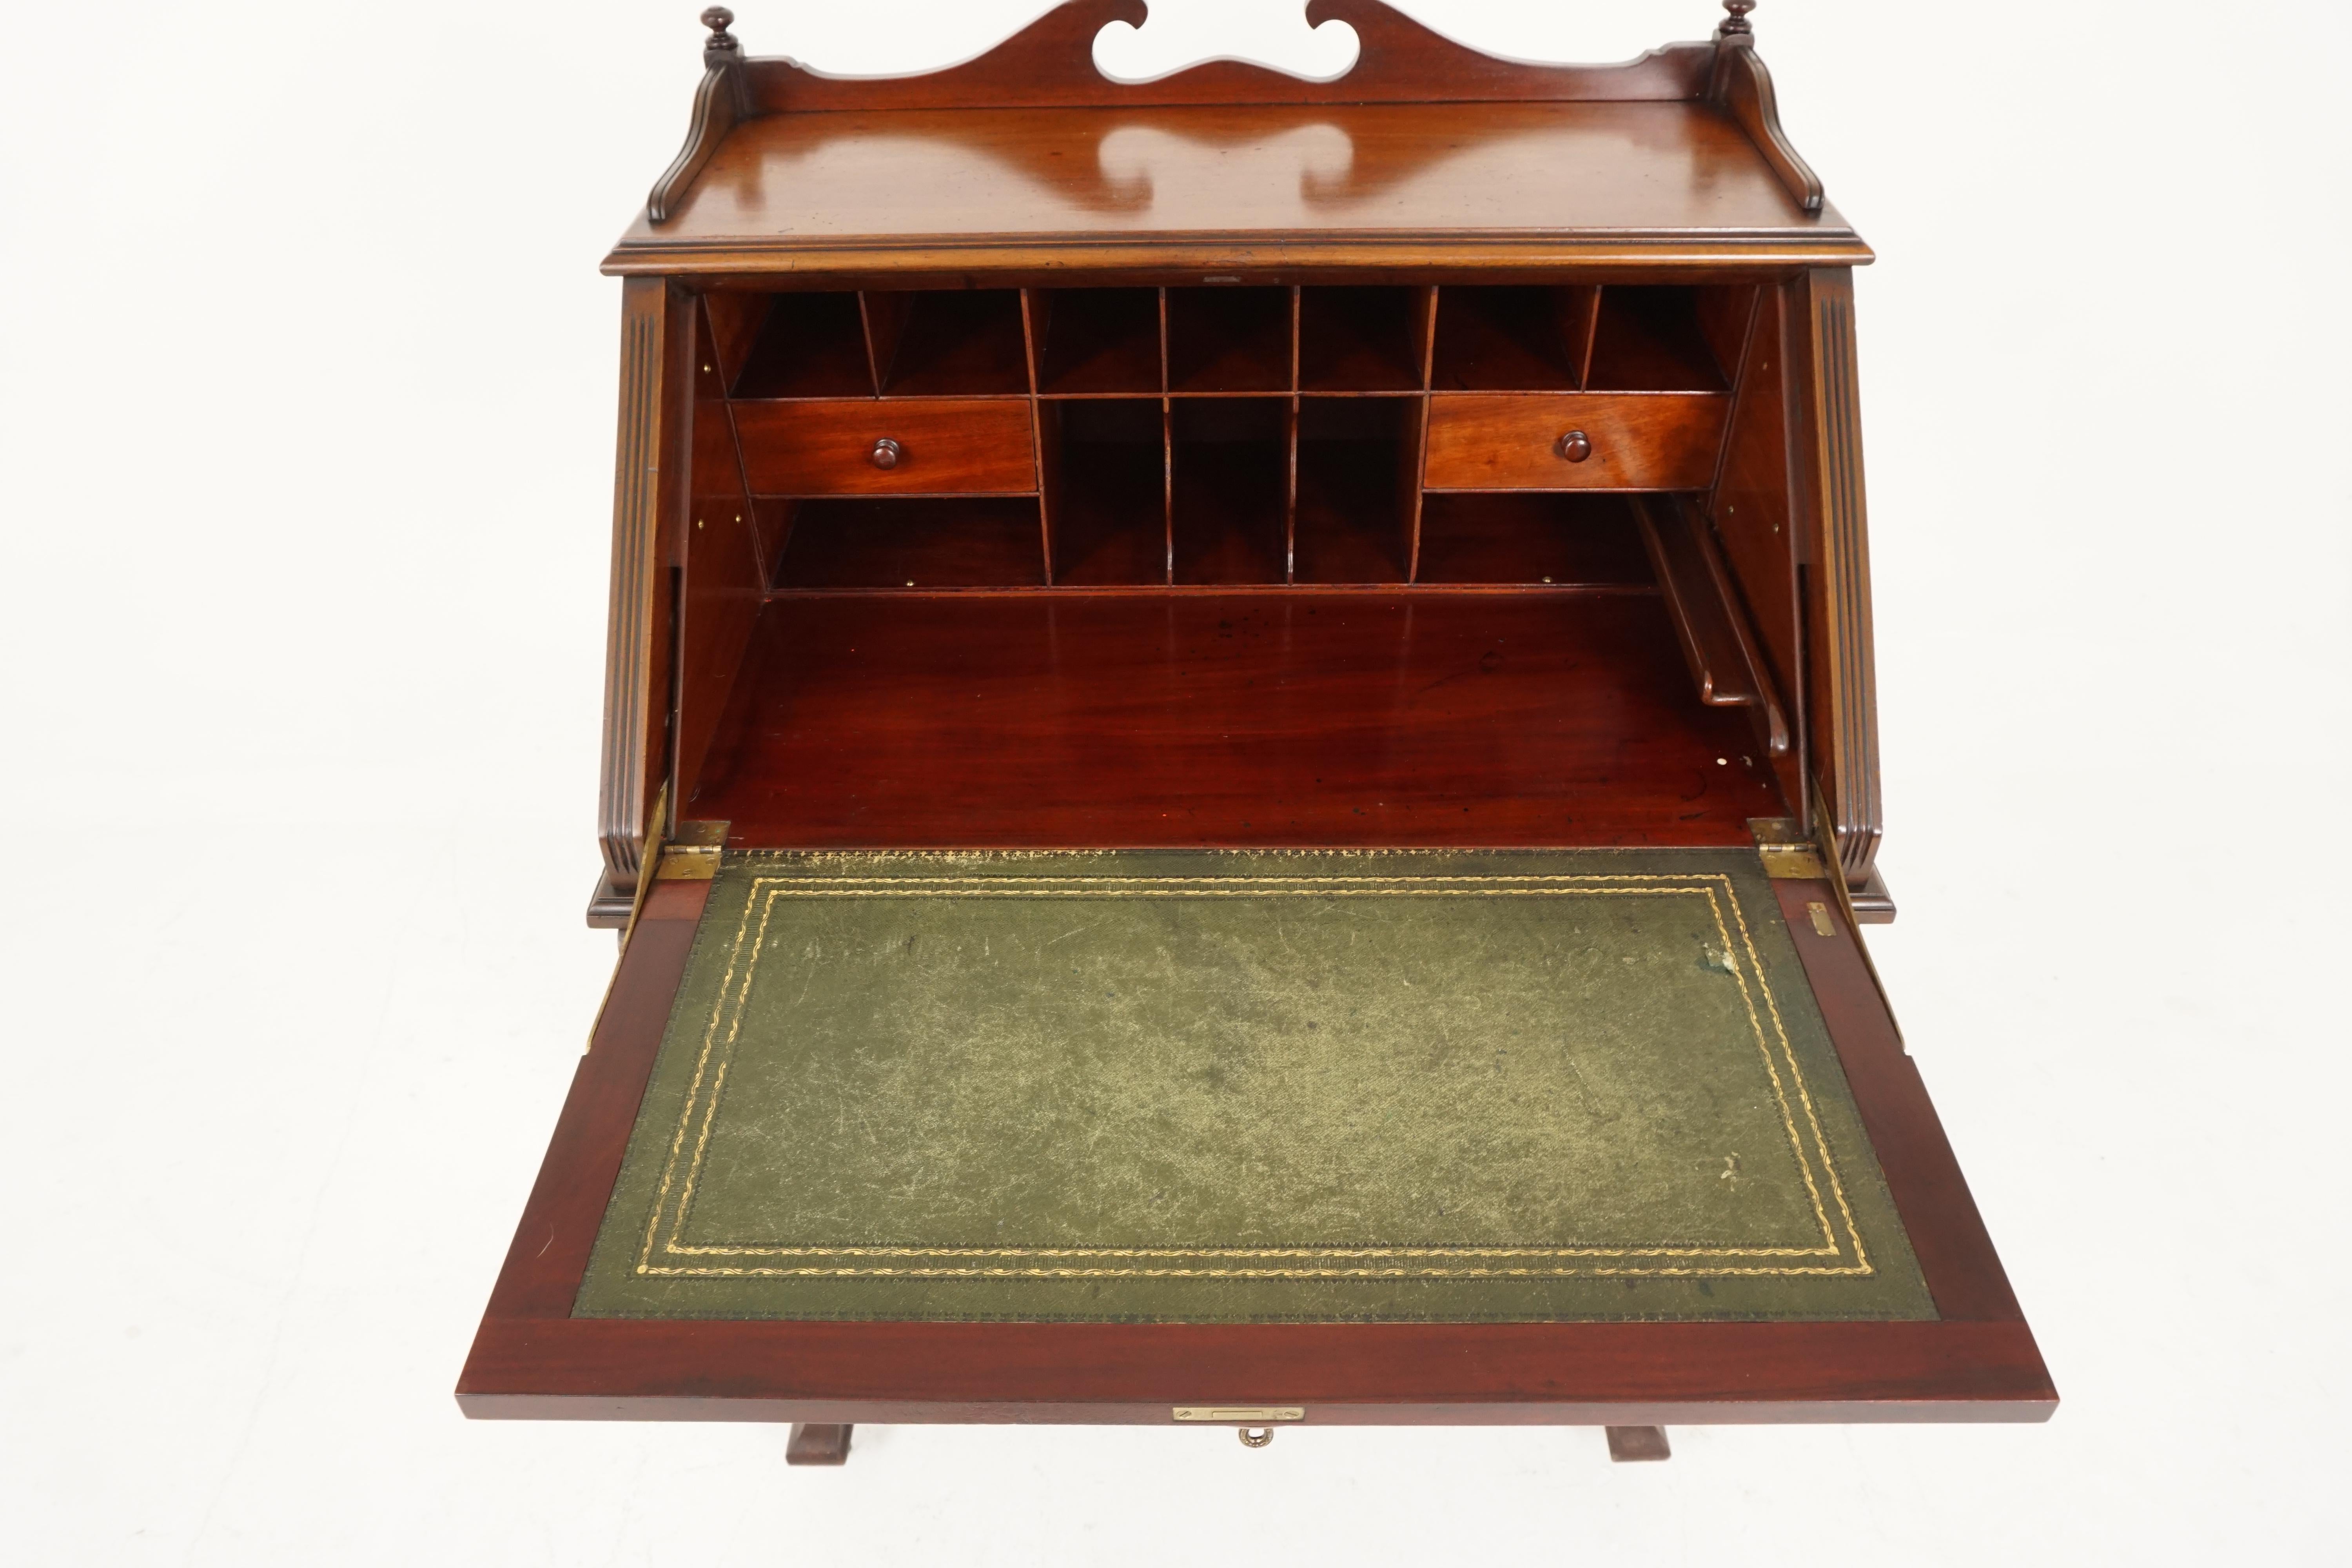 Antique walnut writing desk, Arts & Crafts fall front desk, Scotland 1910, H173

Scotland 1910
Solid walnut
Original finish
Three quarter gallery with finials
Carved detail lid with panels
Brass handle pulls down the lid and a framed support